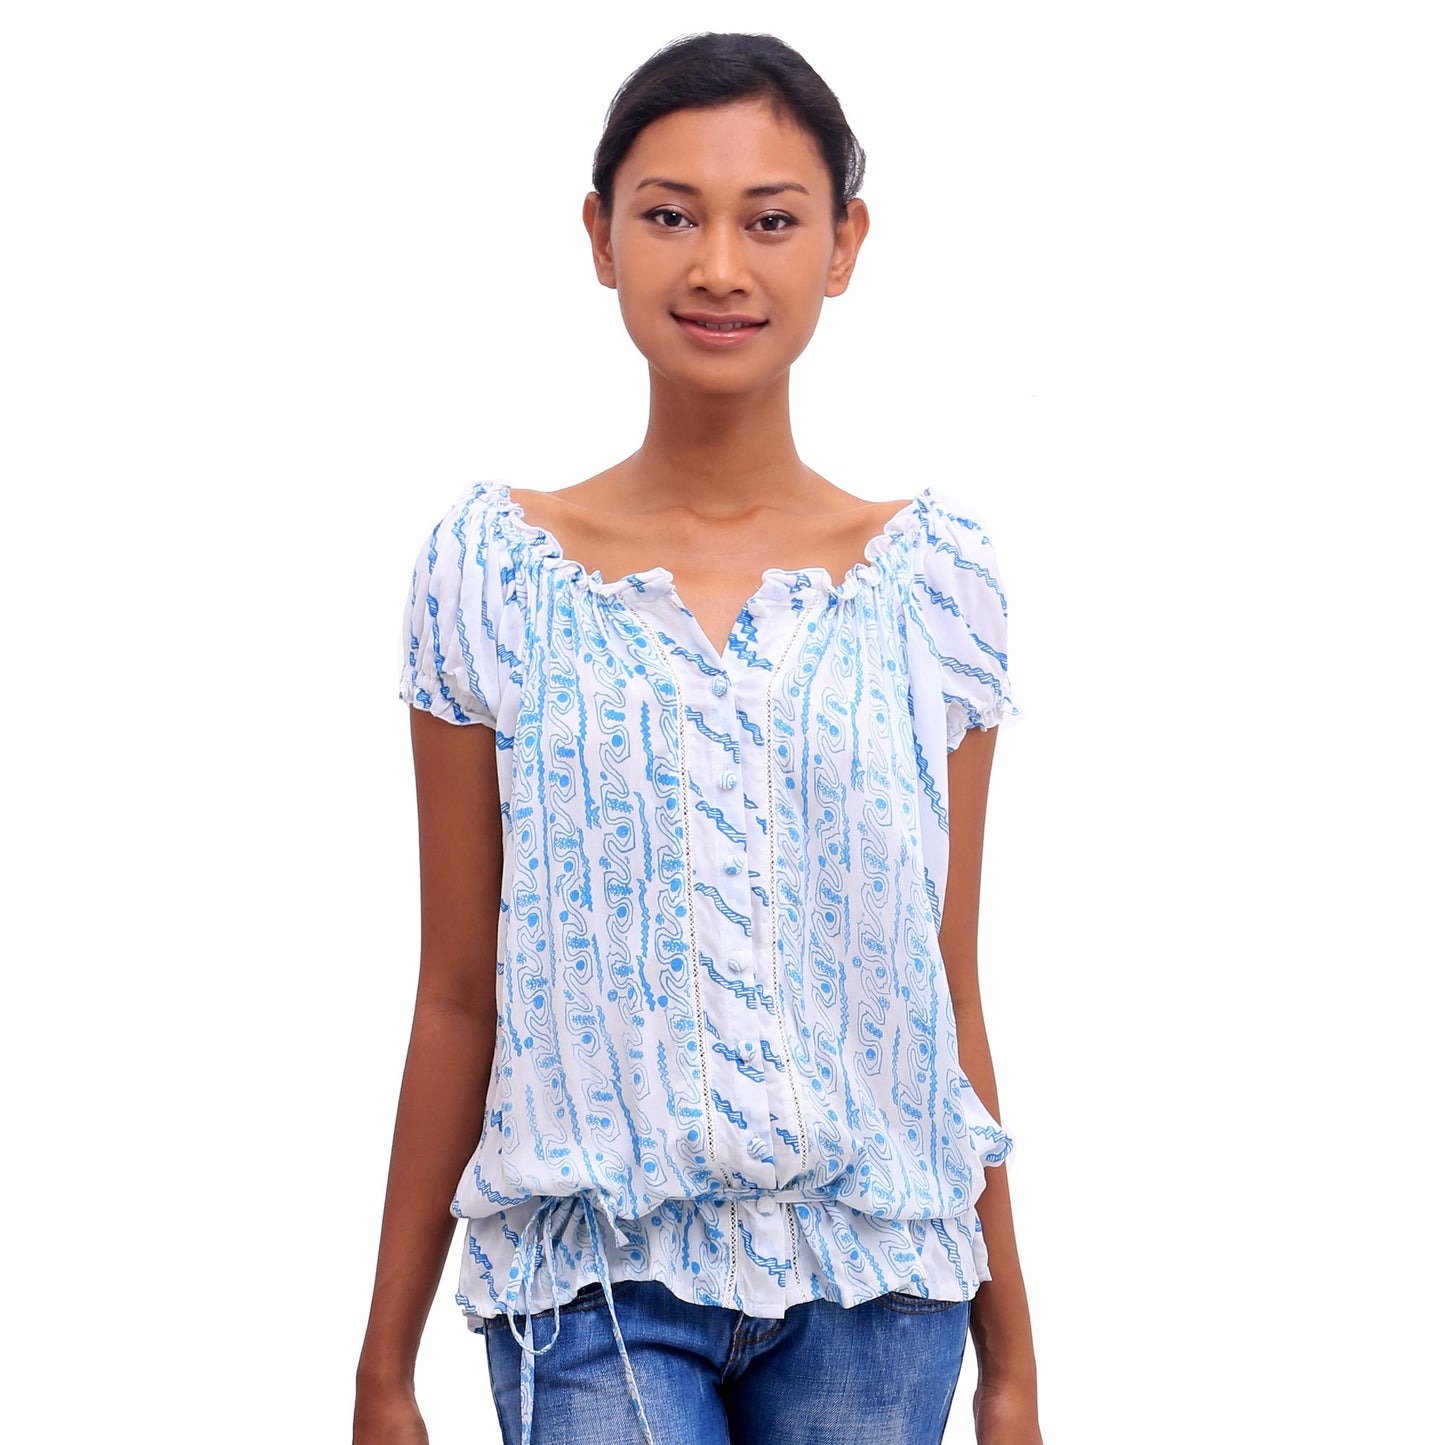 Azure Helix Helix Motif Rayon Off-The-Shoulder Blouse from Bali